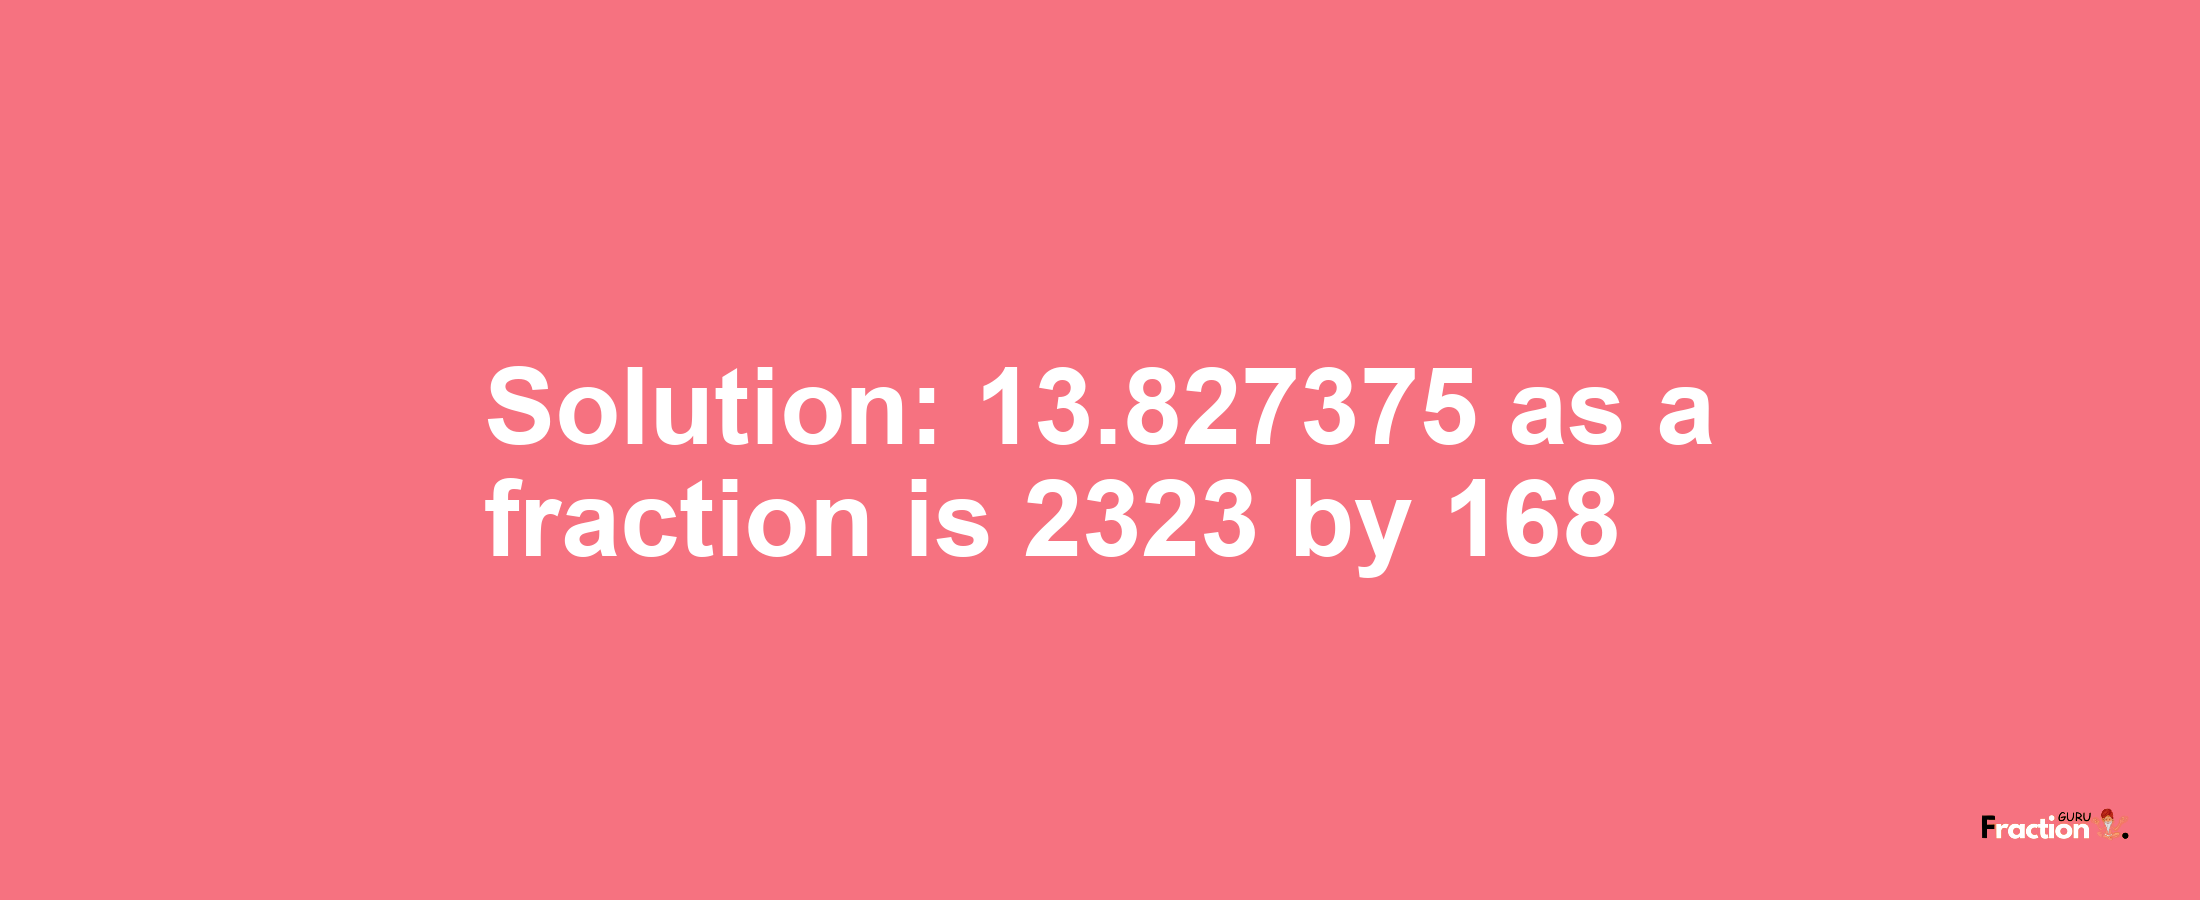 Solution:13.827375 as a fraction is 2323/168